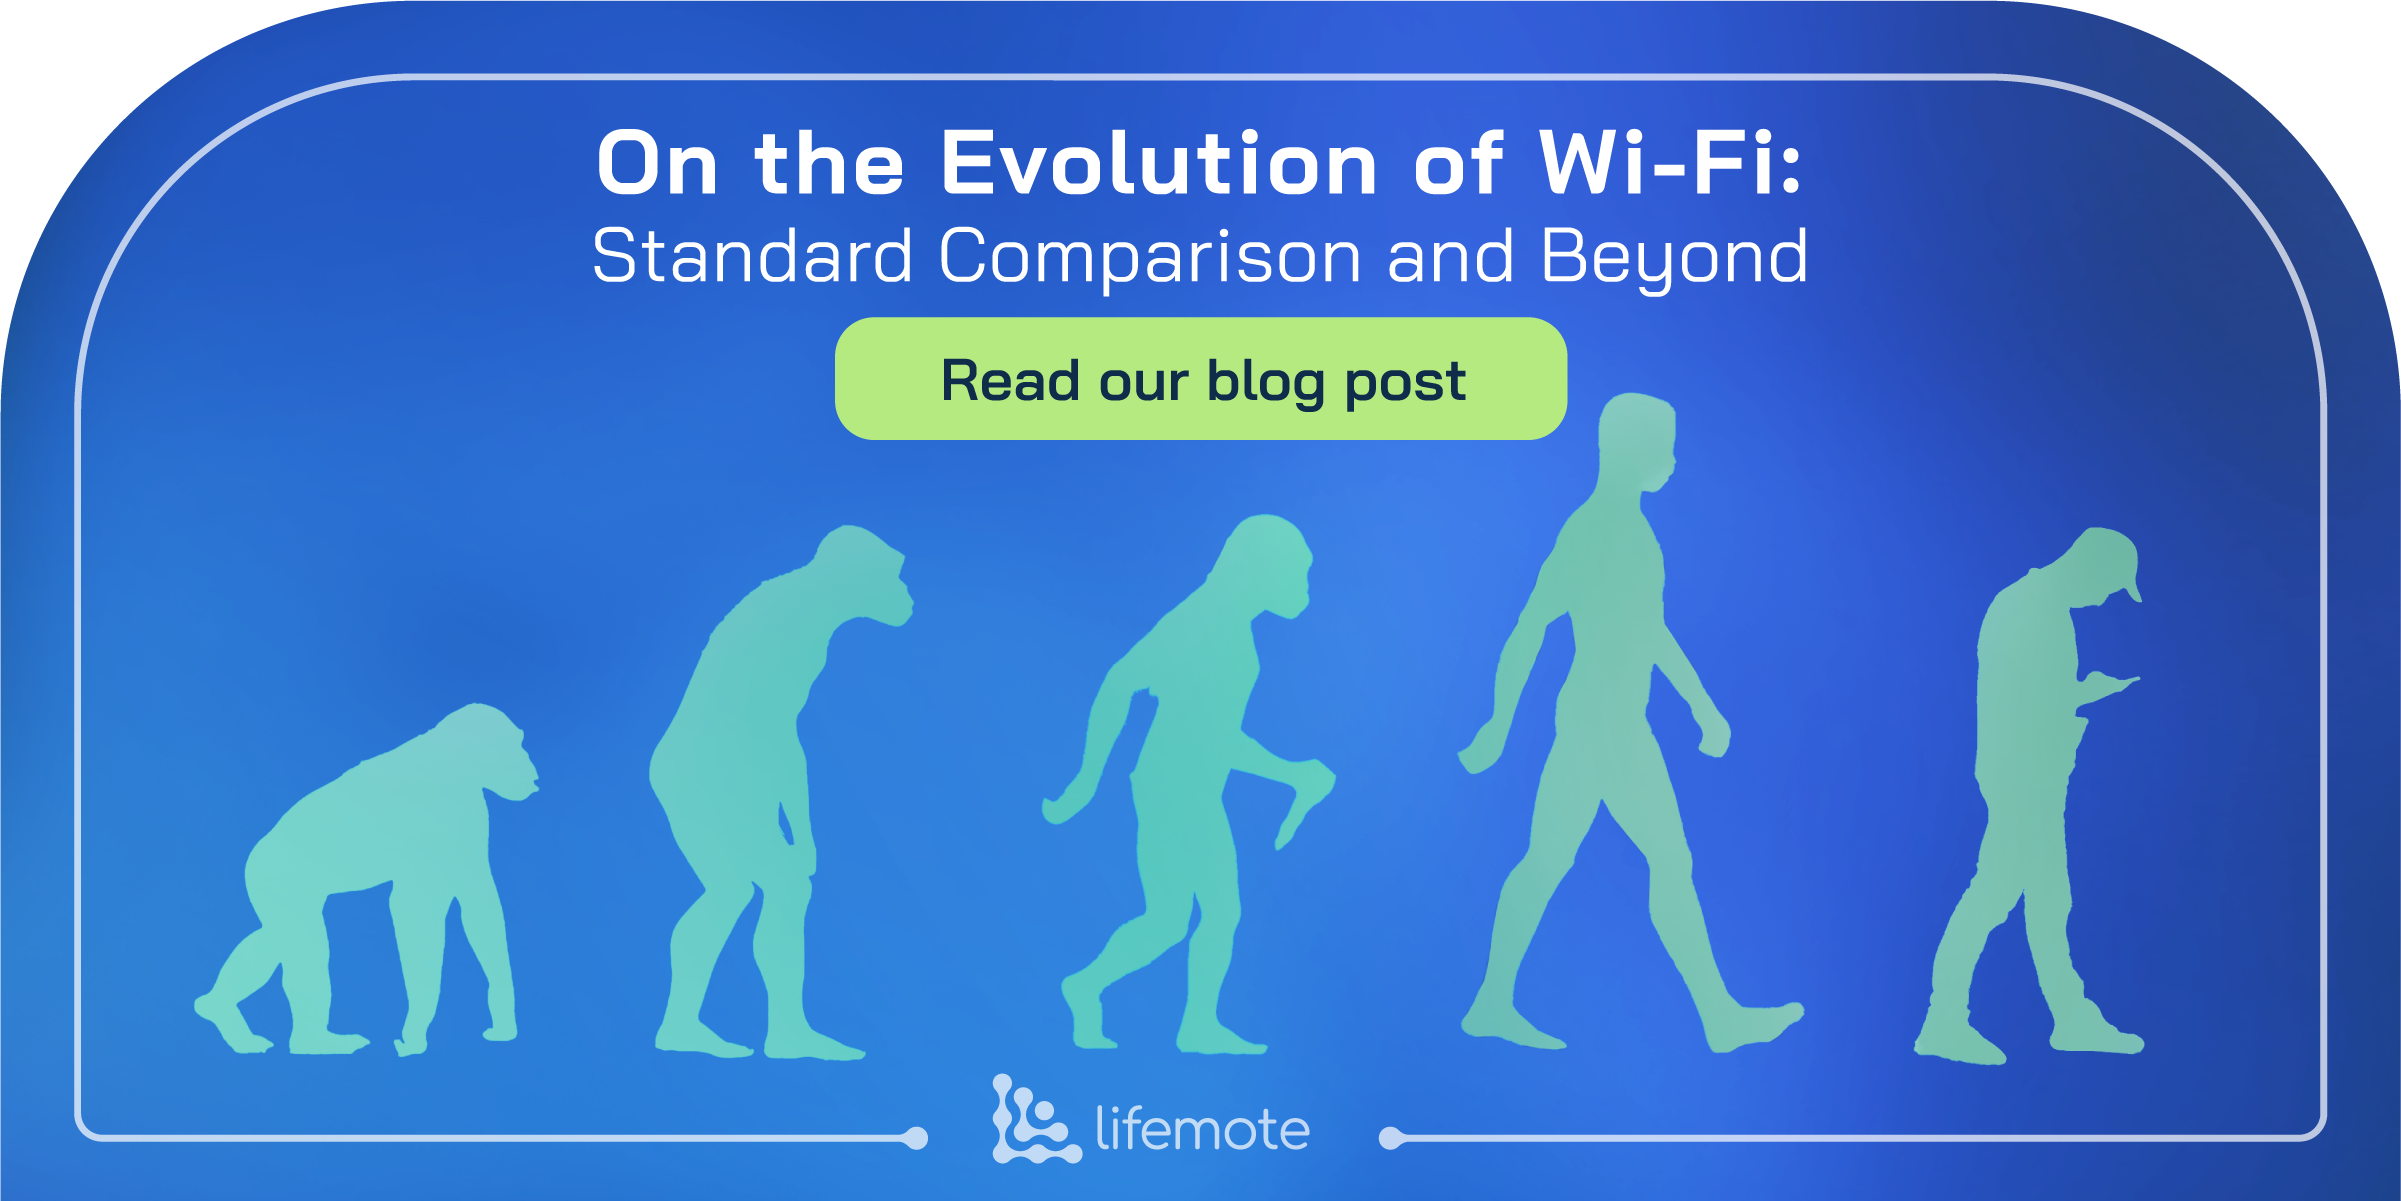 You have probably heard the famous quote about Wi-Fi clients:  “All Wi-Fi clients are equal, but some Wi-Fi clients are more equal than others.” 